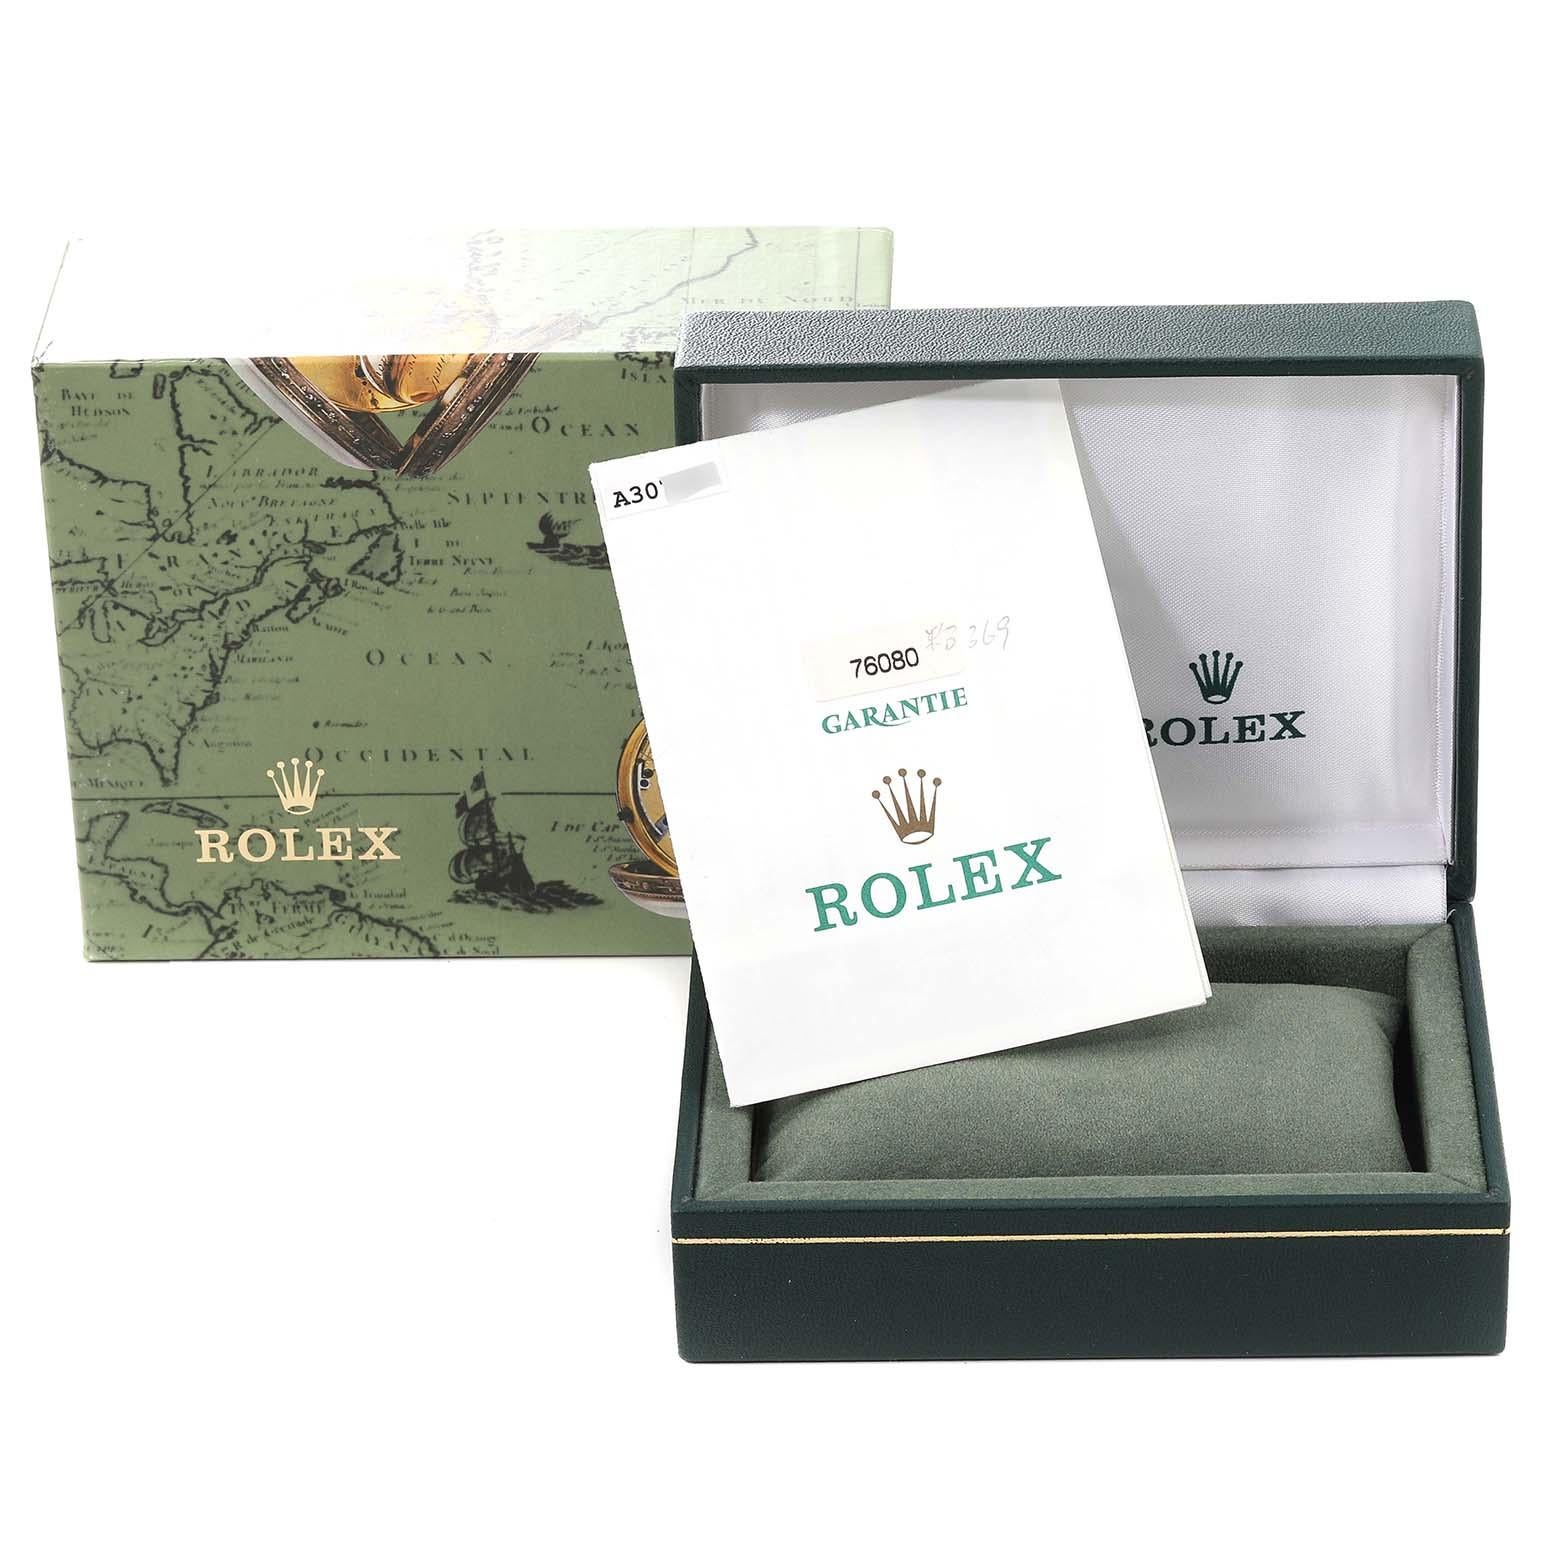 Rolex Oyster Perpetual Salmon Dial Steel Ladies Watch 76080 Box Papers 8